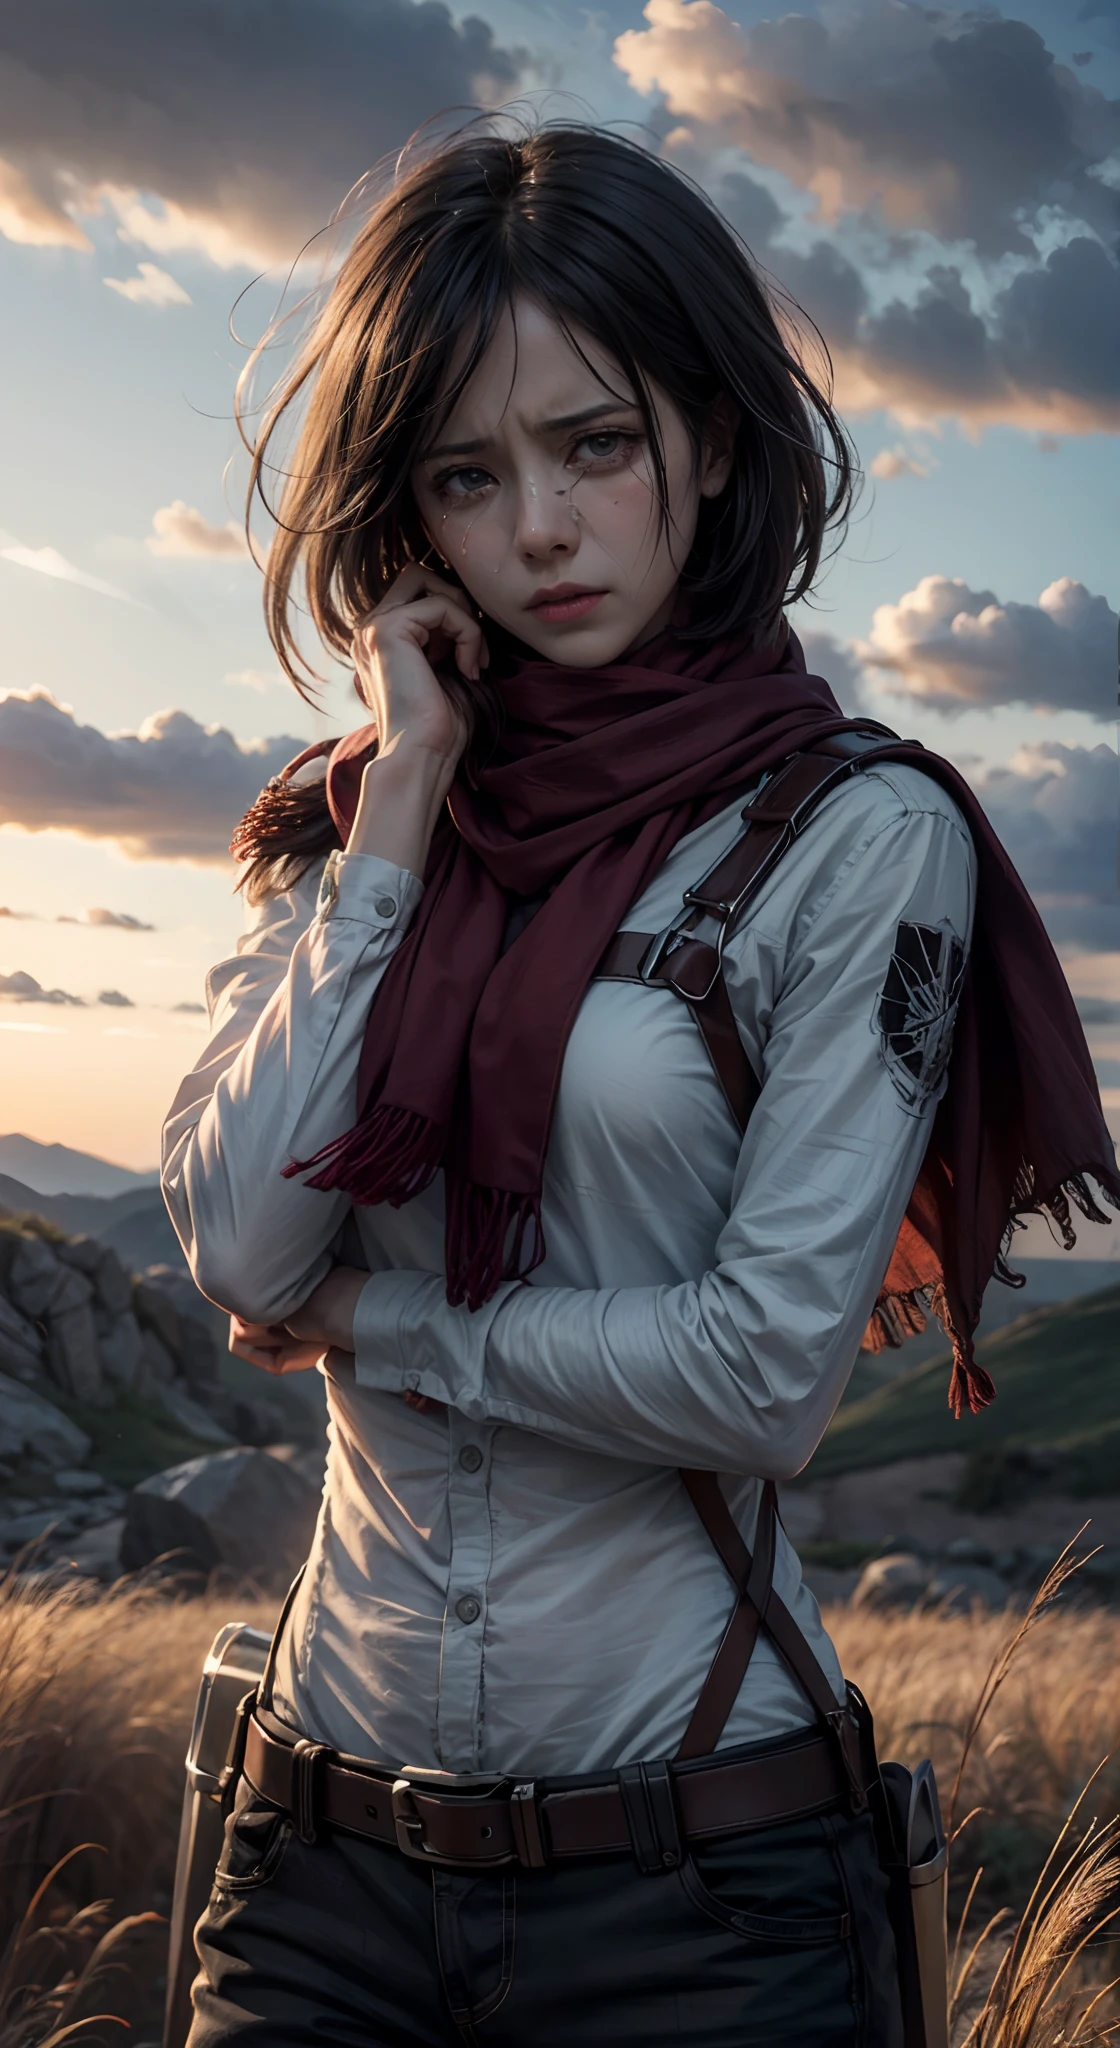 (masterpiece), (hyper realistic), Attack on Titan, half body shot, Mikasa Ackerman, Crying, sadness, Tears, A maroon scarf around his neck, Loneliness, Lost, dinamic lighting, Grassland background